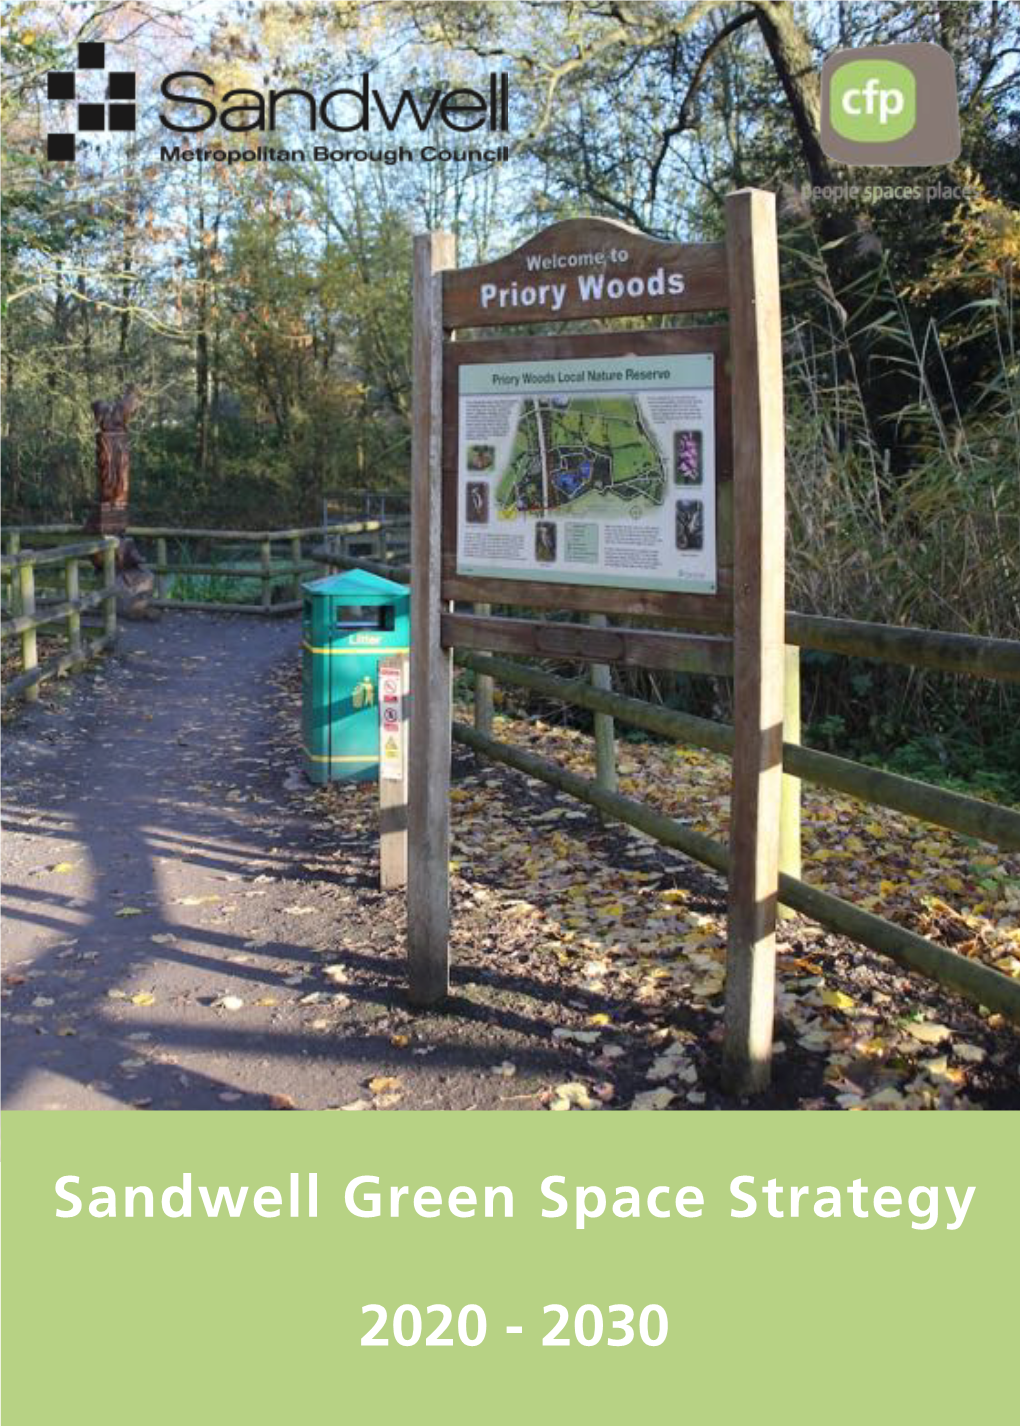 Sandwell Green Space Strategy 2020 - 2030